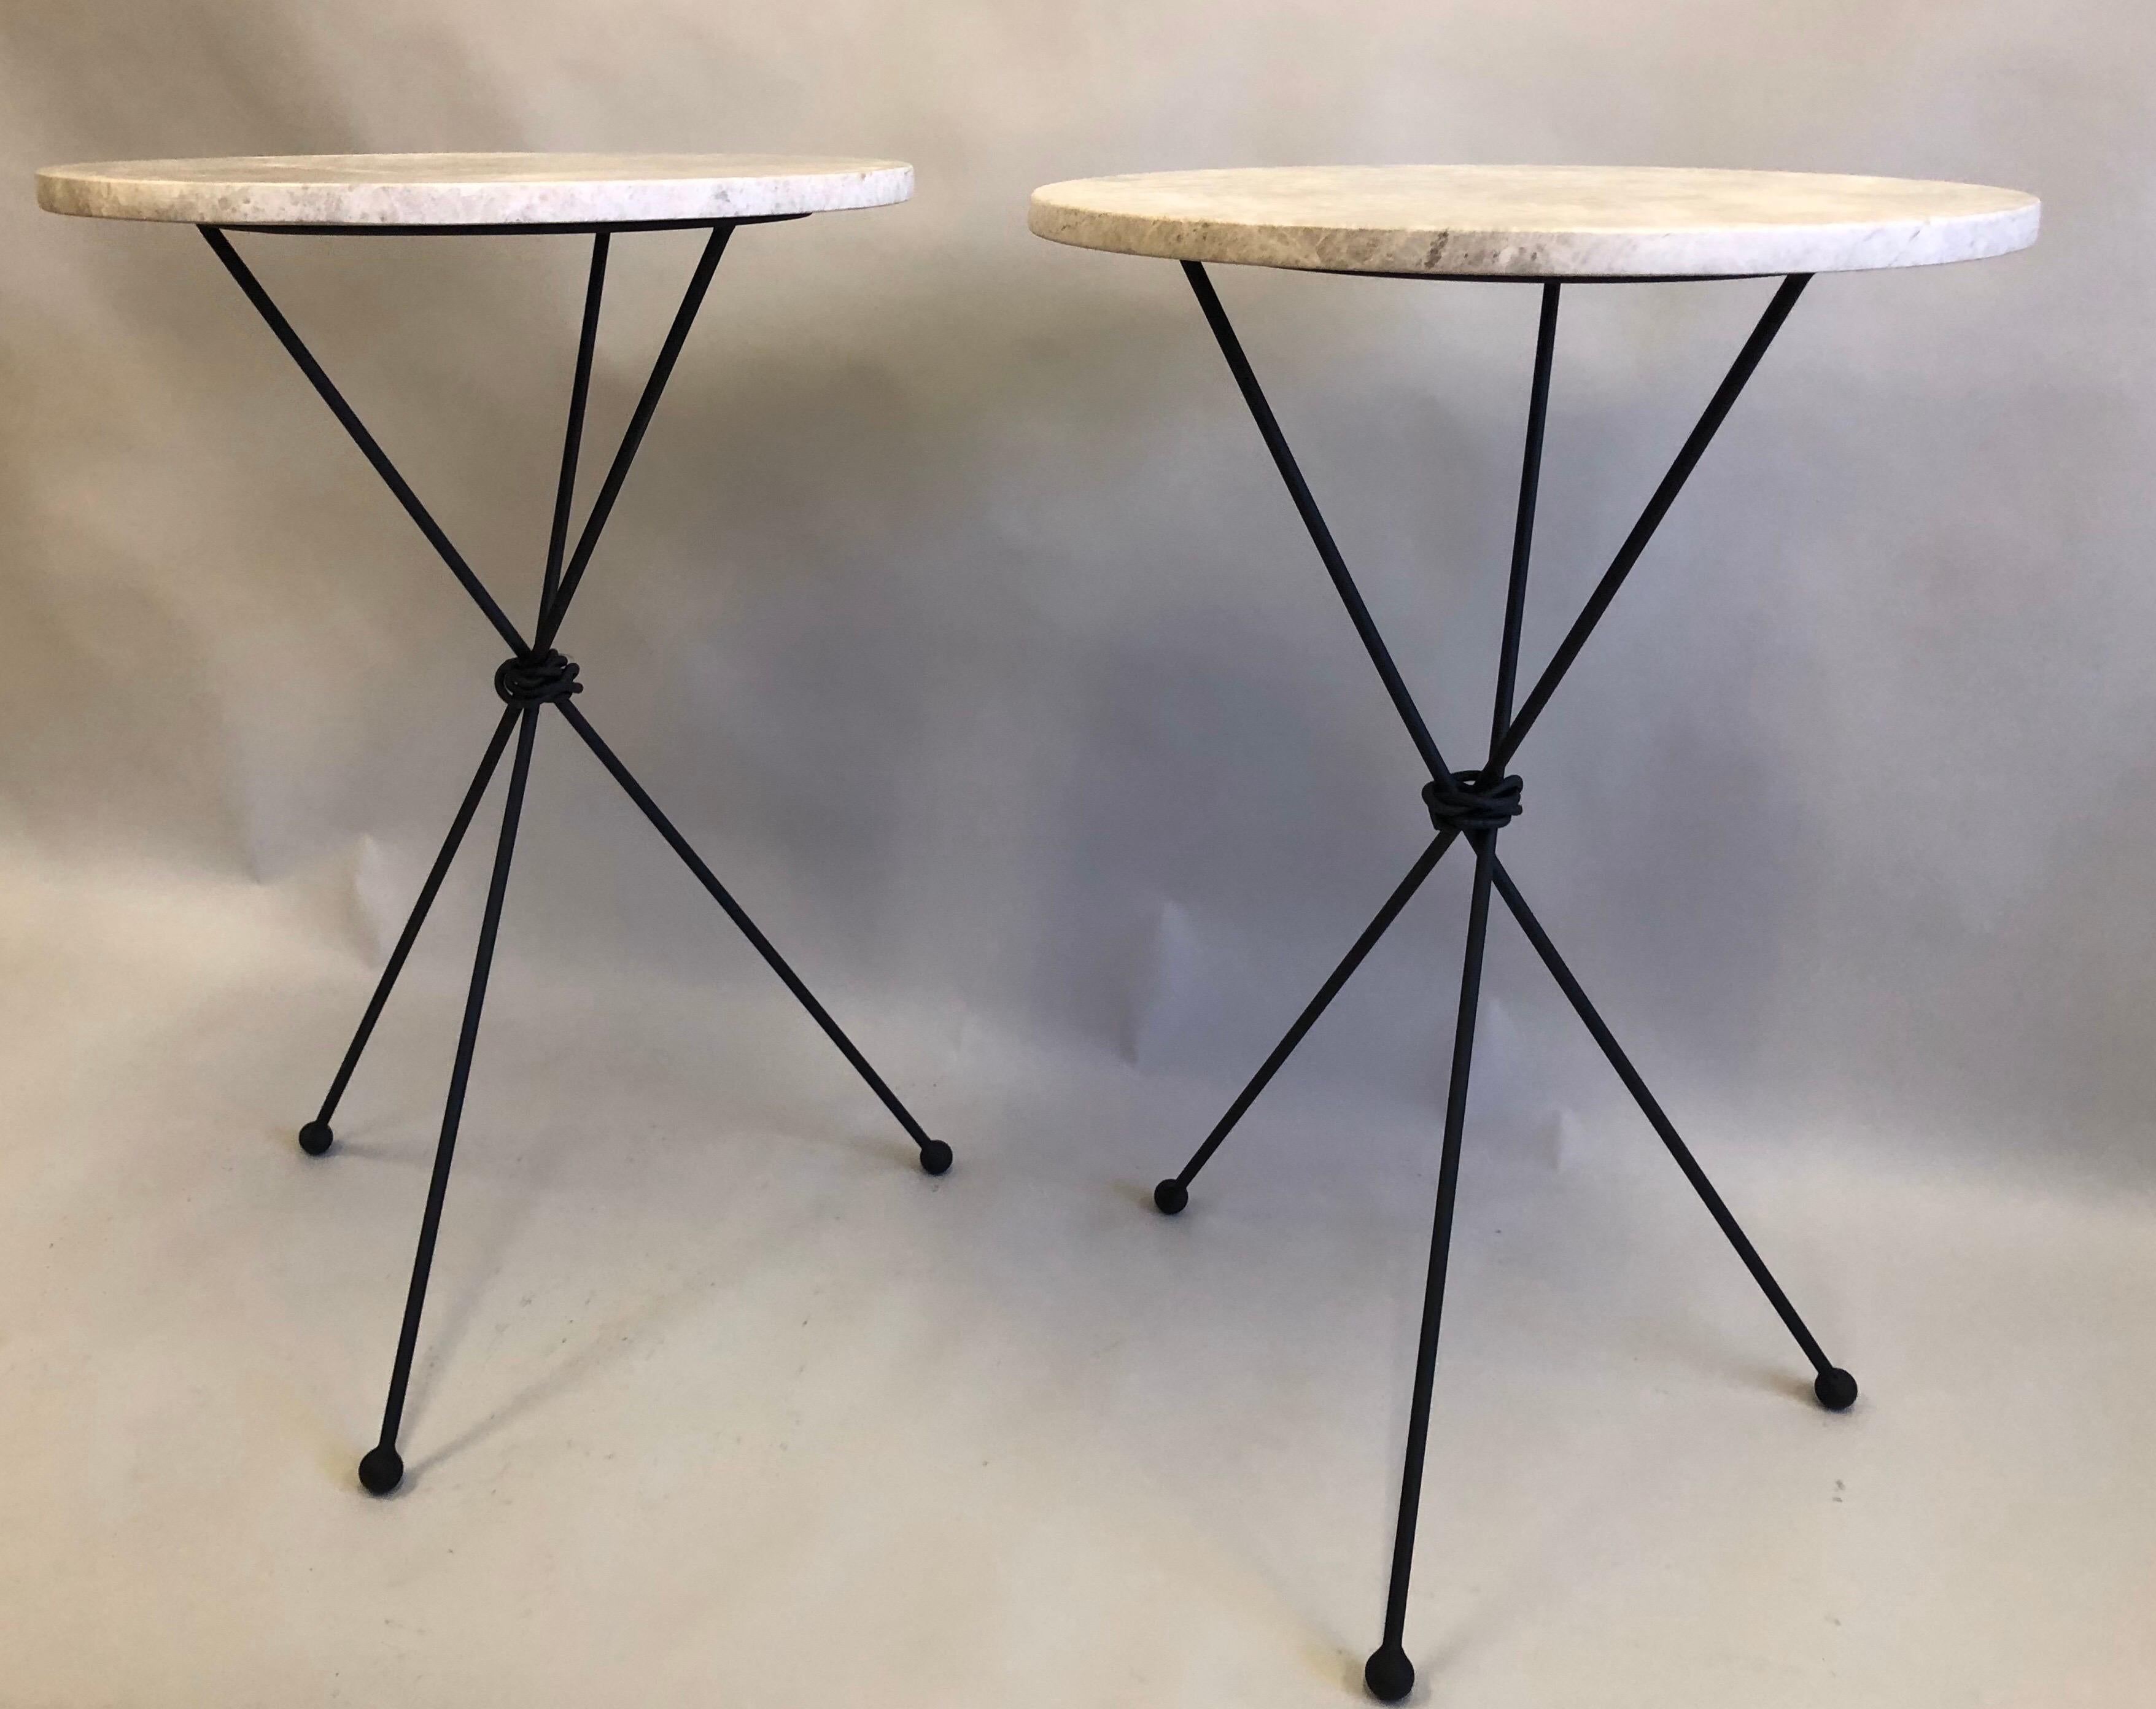 Elegant Pair of French Mid-Century Modern Style Wrought Iron and Limestone Side or End Tables in Style of Alberto and Diego Giacometti for Jean Michel Frank.

Each table sits on a hand-hammered wrought iron tripod base with ball feet and the legs.